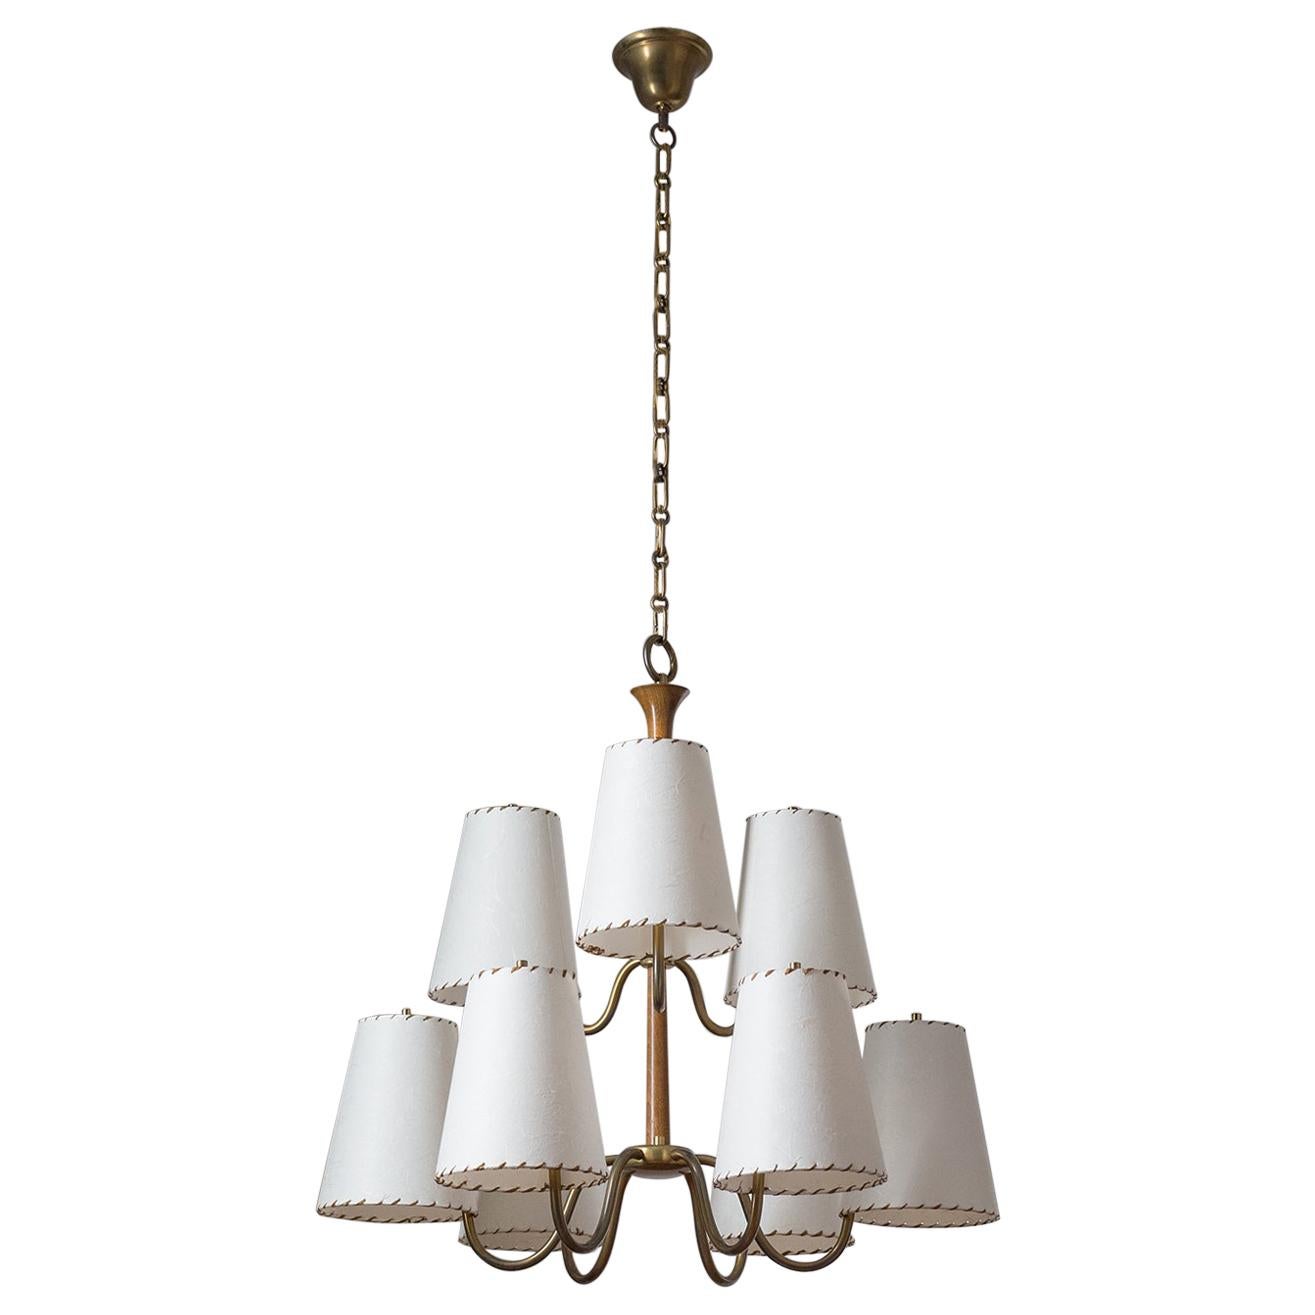 Large Austrian Chandelier, 1930s, Brass, Wood and Paper Shades